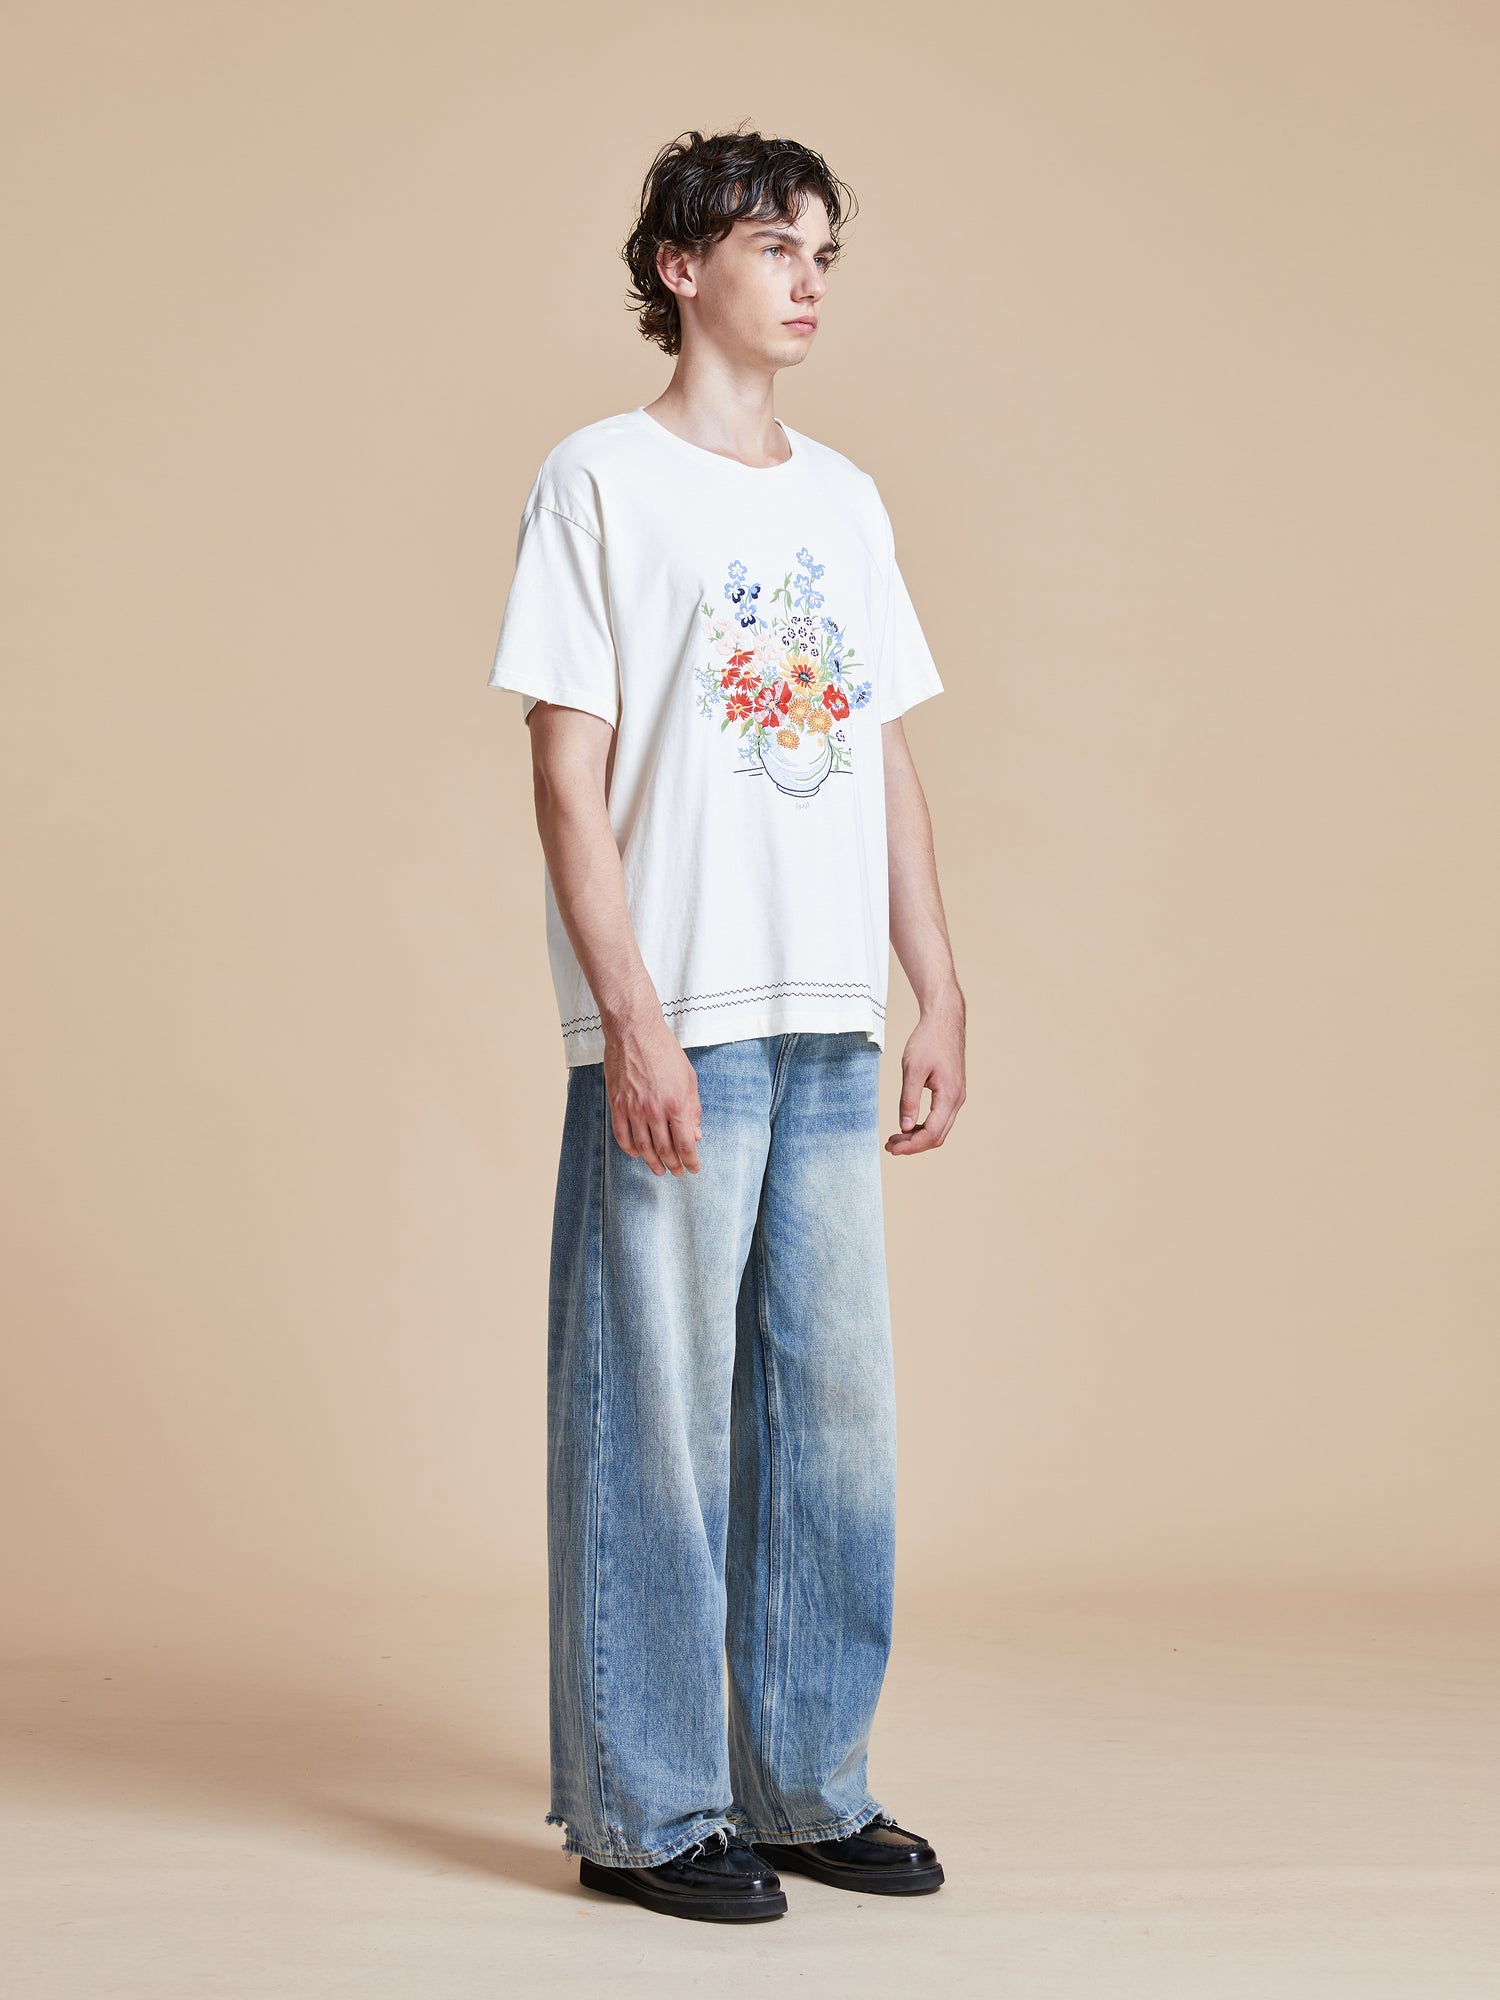 A man wearing a Found Bouquet Flowers Tee and blue jeans.